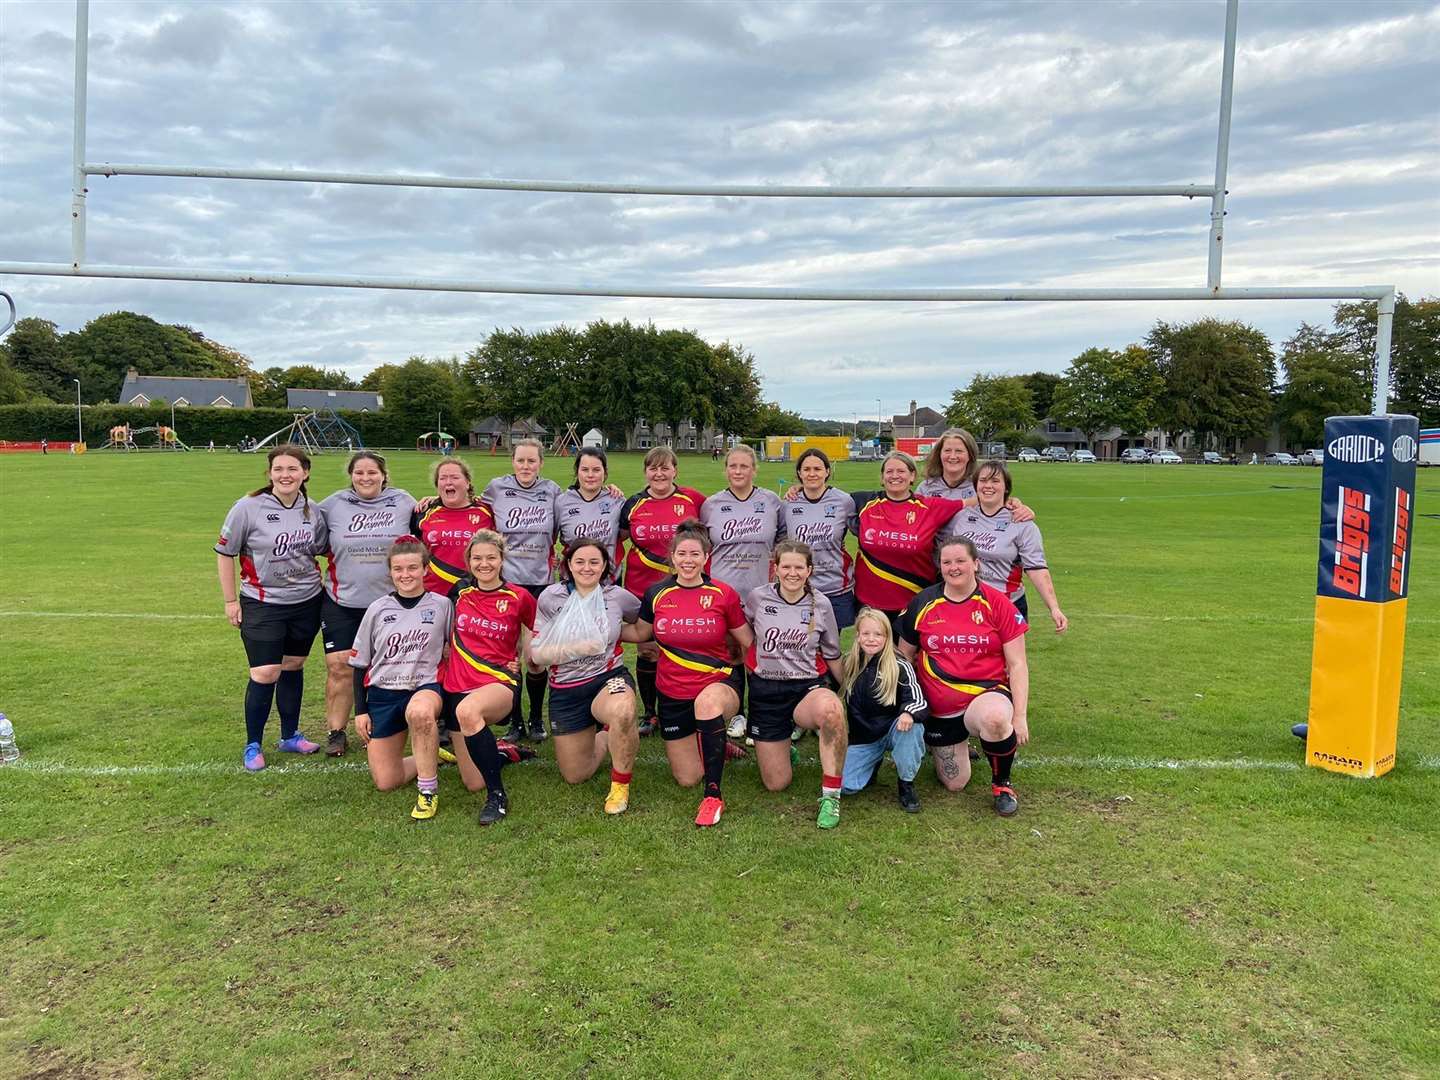 Turriff's and Mackie's womens teams joined forces for the new league games.